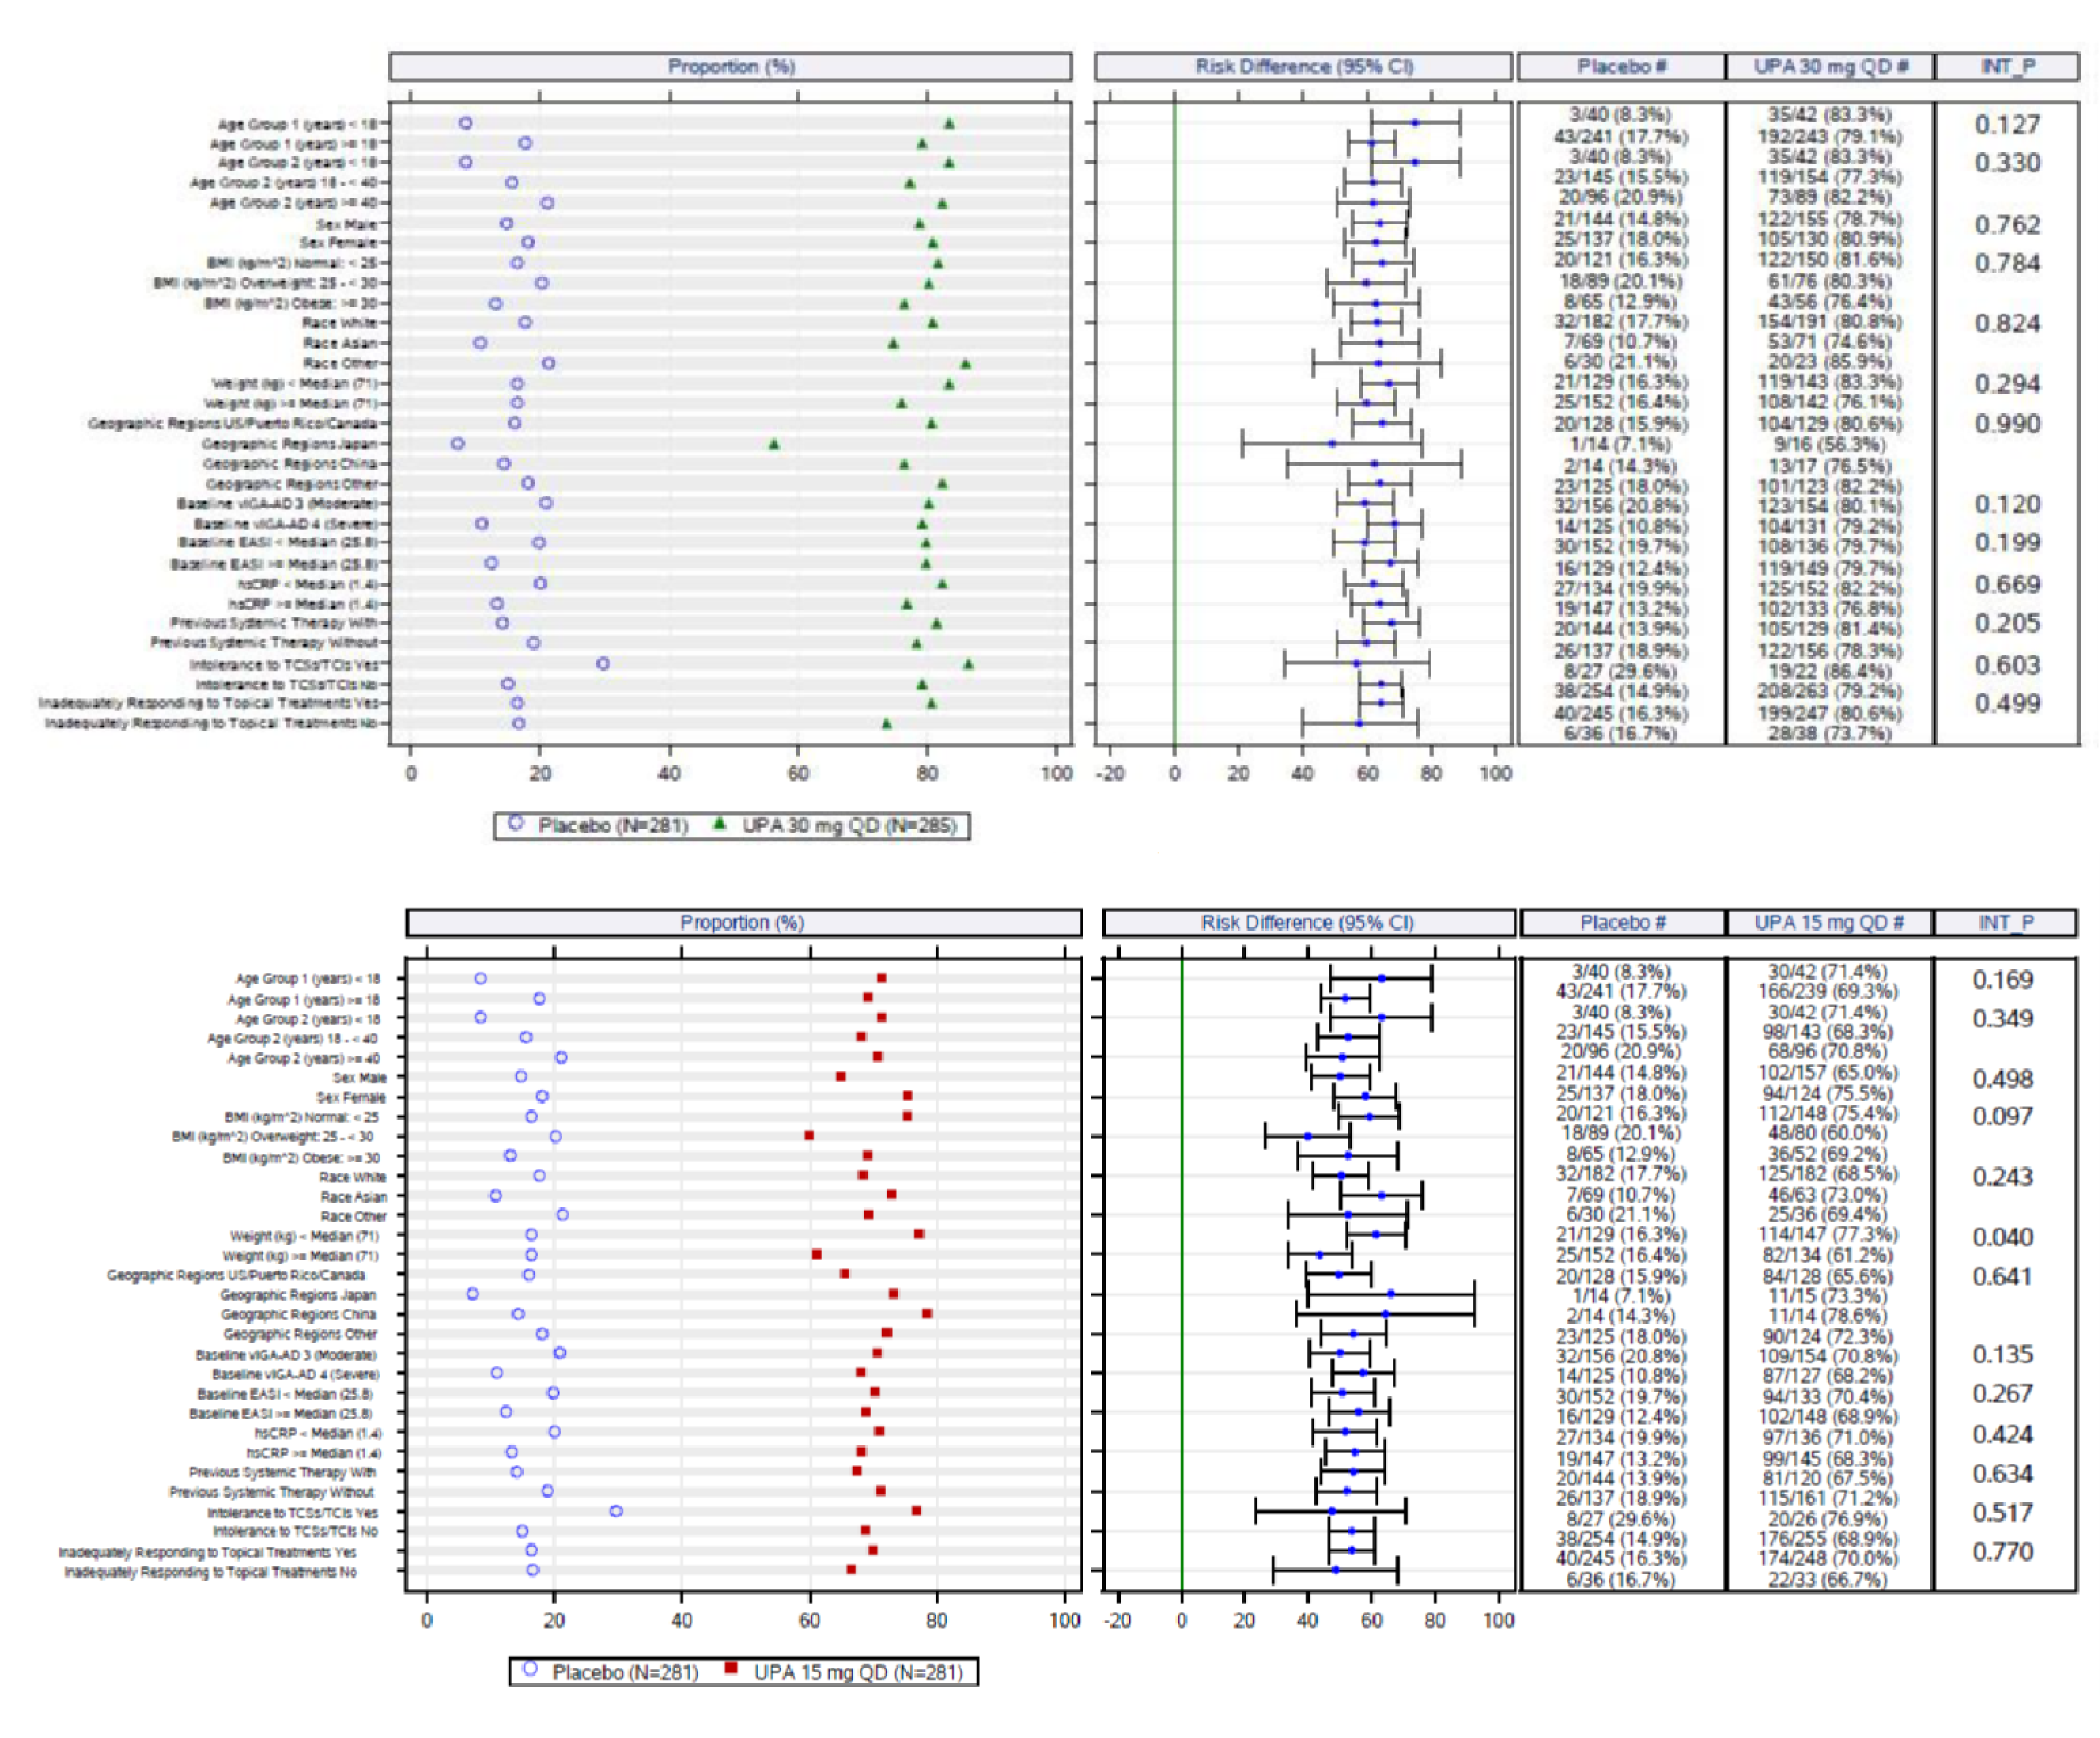 The figure depicts the proportion of patients achieving EASI 75 in different subgroups as measured (refer to body text) in the Measure Up 1 study with no subgroup being statistically significant.